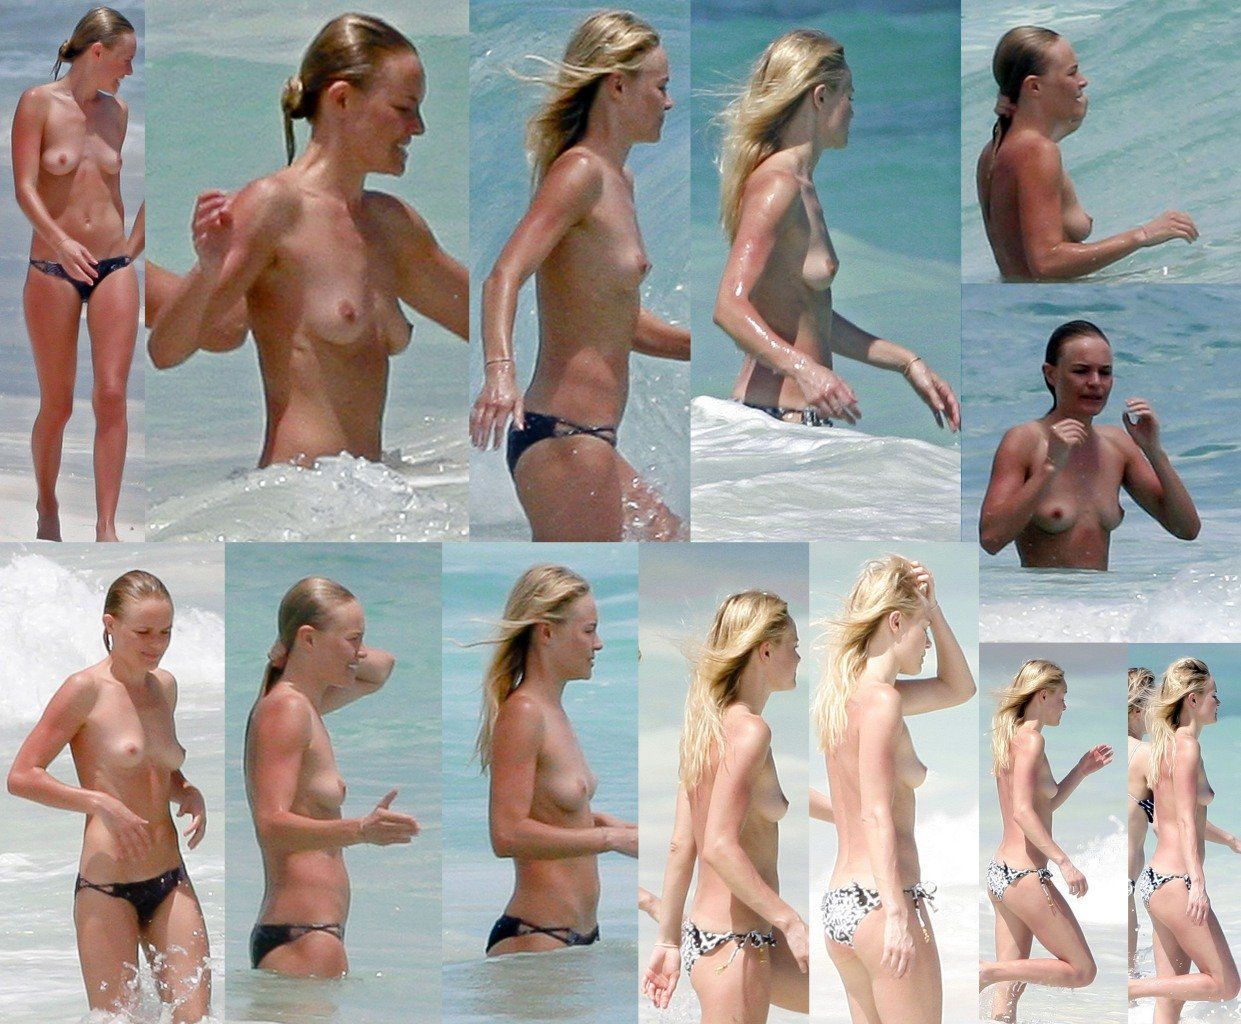 Kate bosworth nude